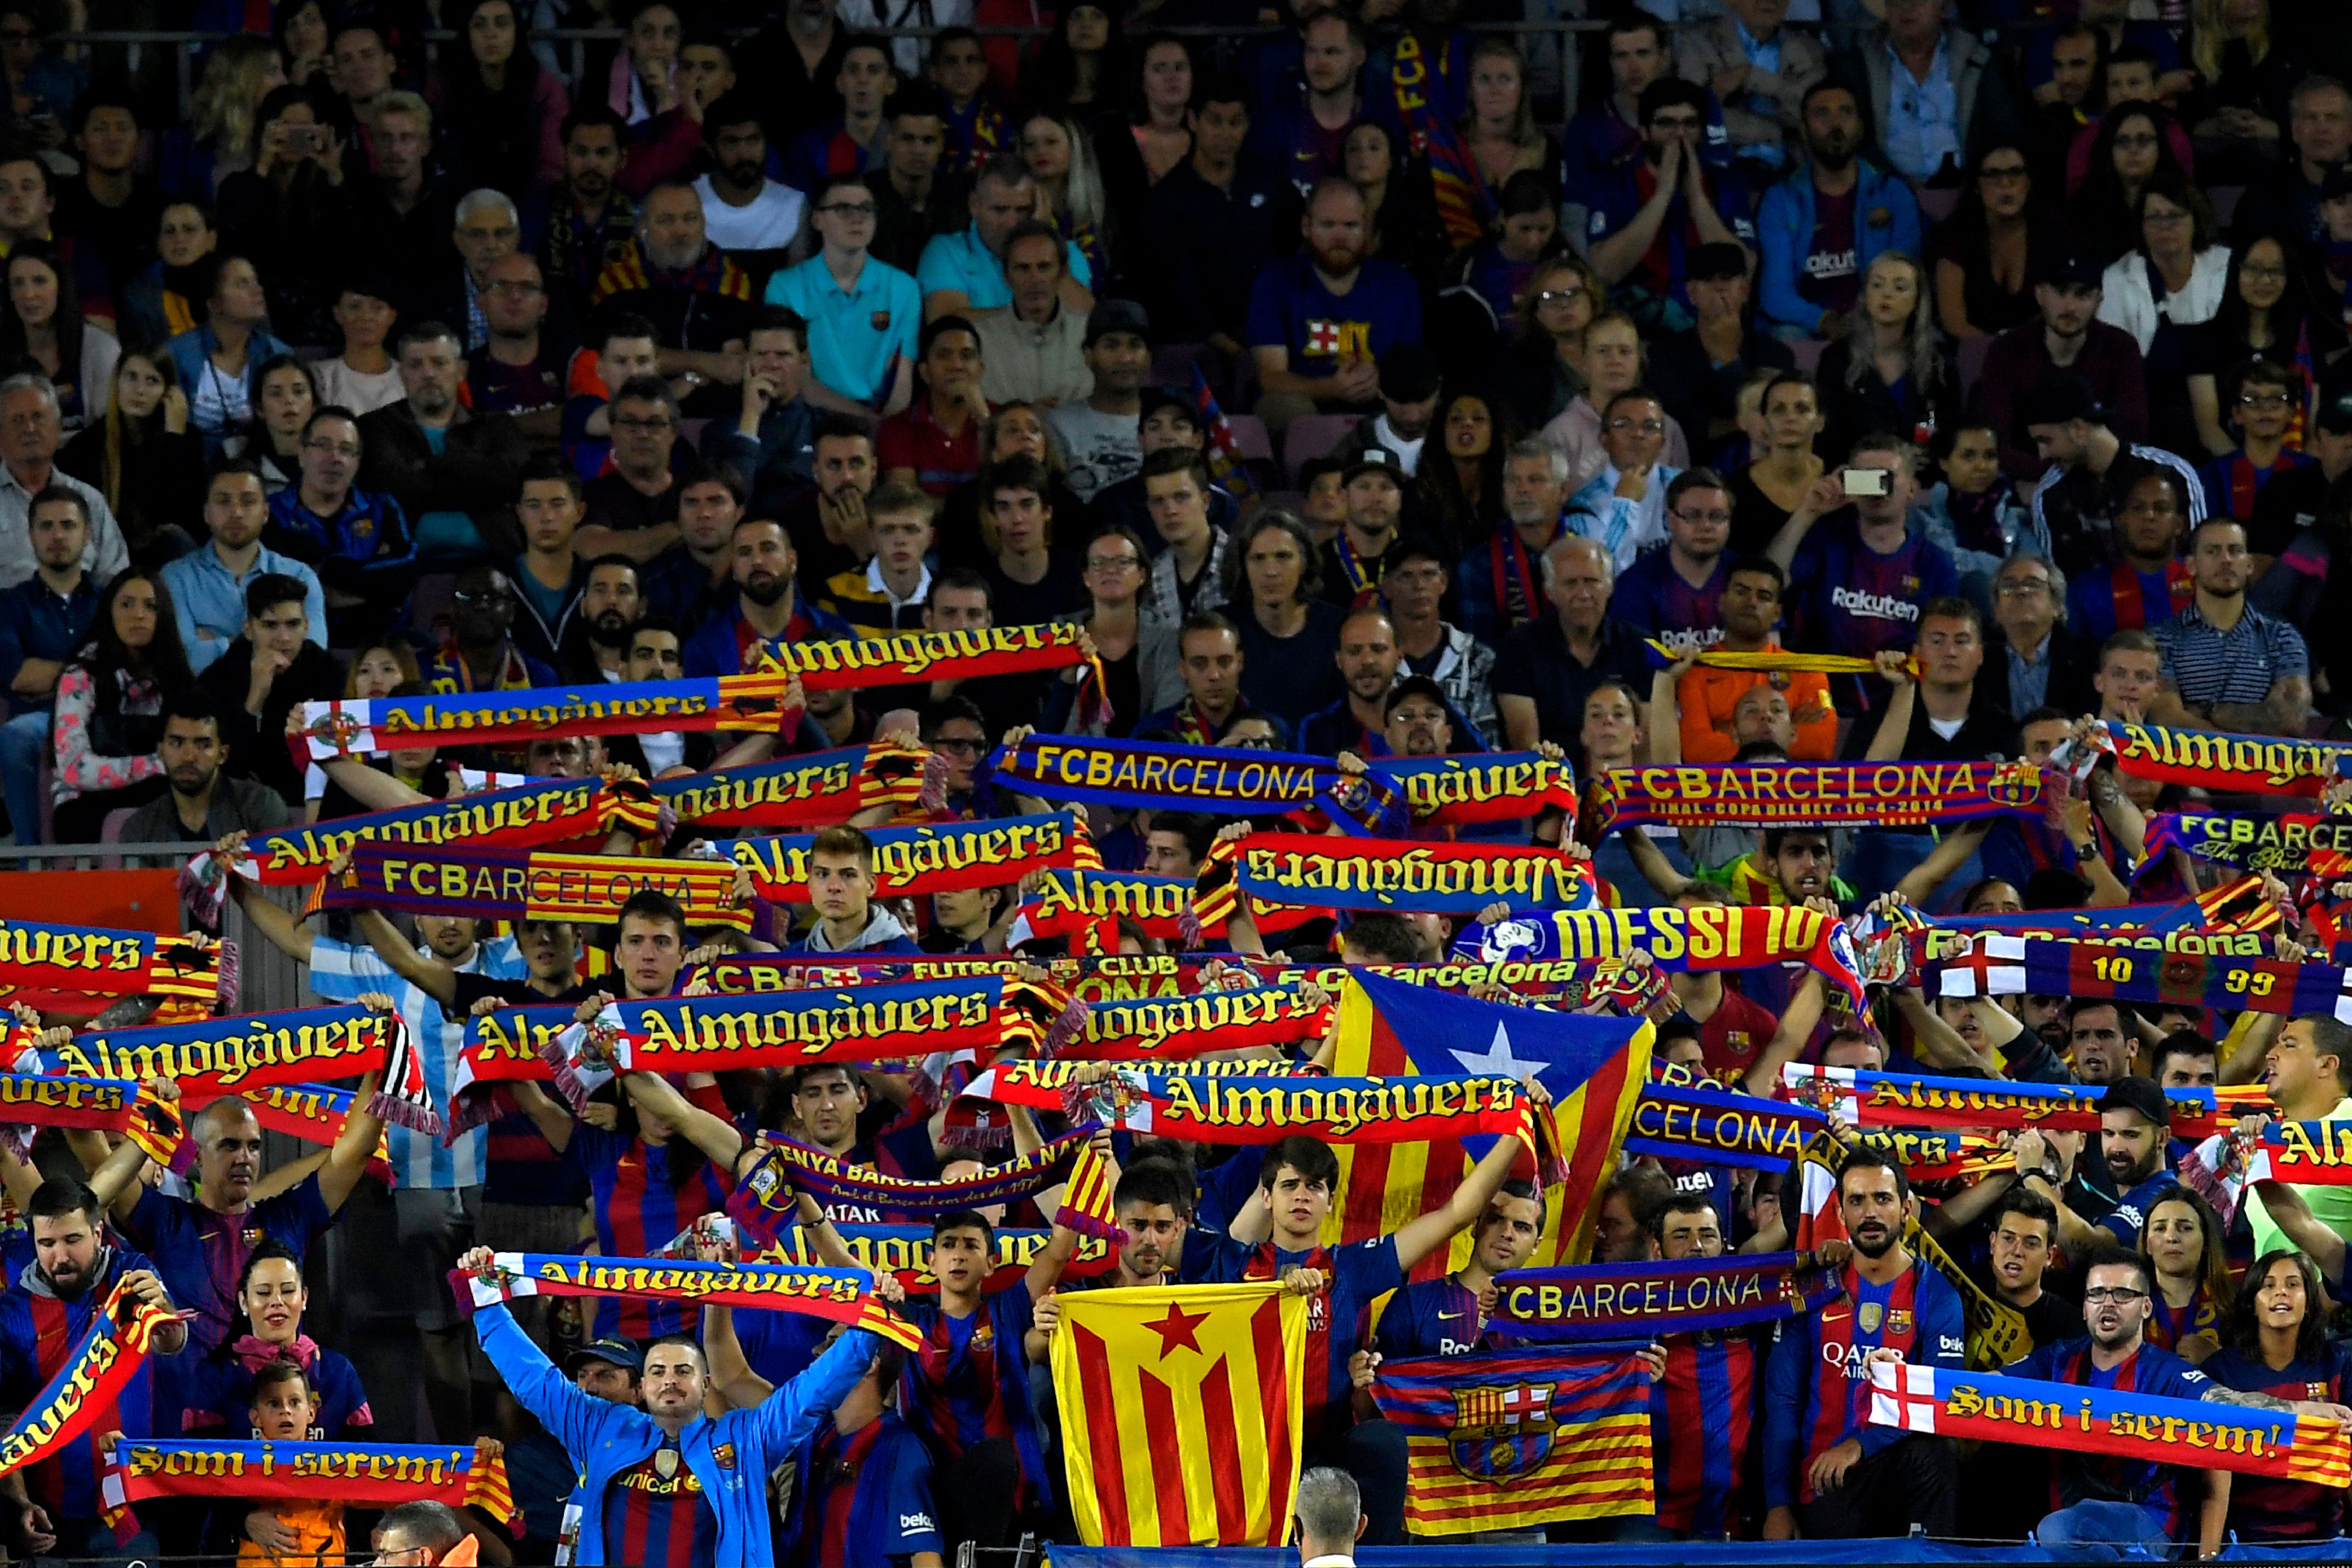 Barcelona's supporters cheer their team during the Spanish Liga football match Barcelona vs Espanyol at the Camp Nou stadium in Barcelona on September 9, 2017. / AFP PHOTO / LLUIS GENE        (Photo credit should read LLUIS GENE/AFP/Getty Images)